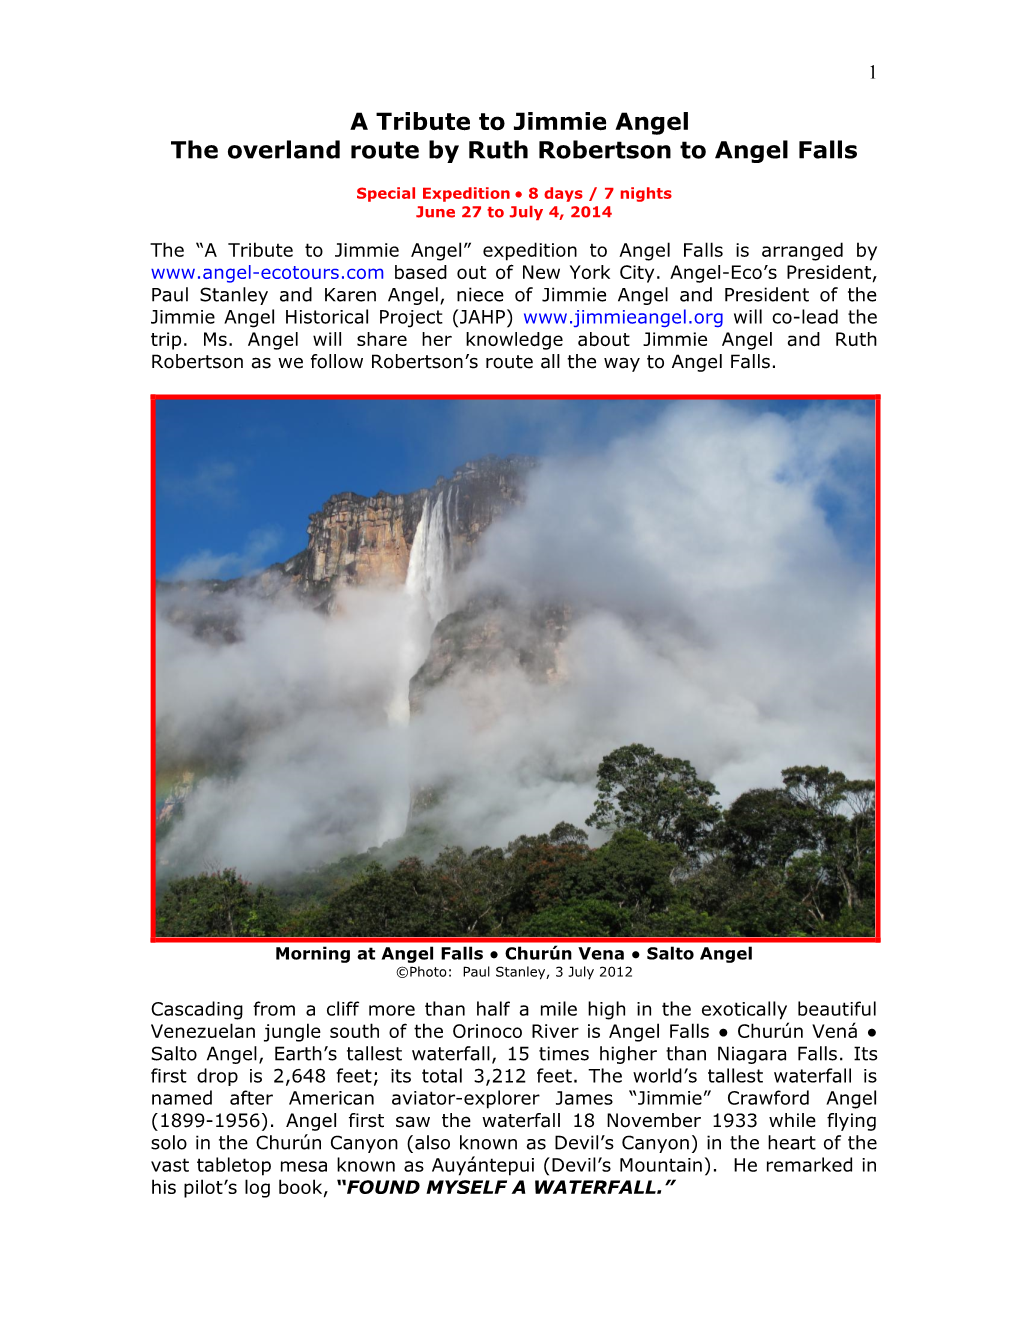 A Tribute to Jimmie Angel the Overland Route by Ruth Robertson to Angel Falls